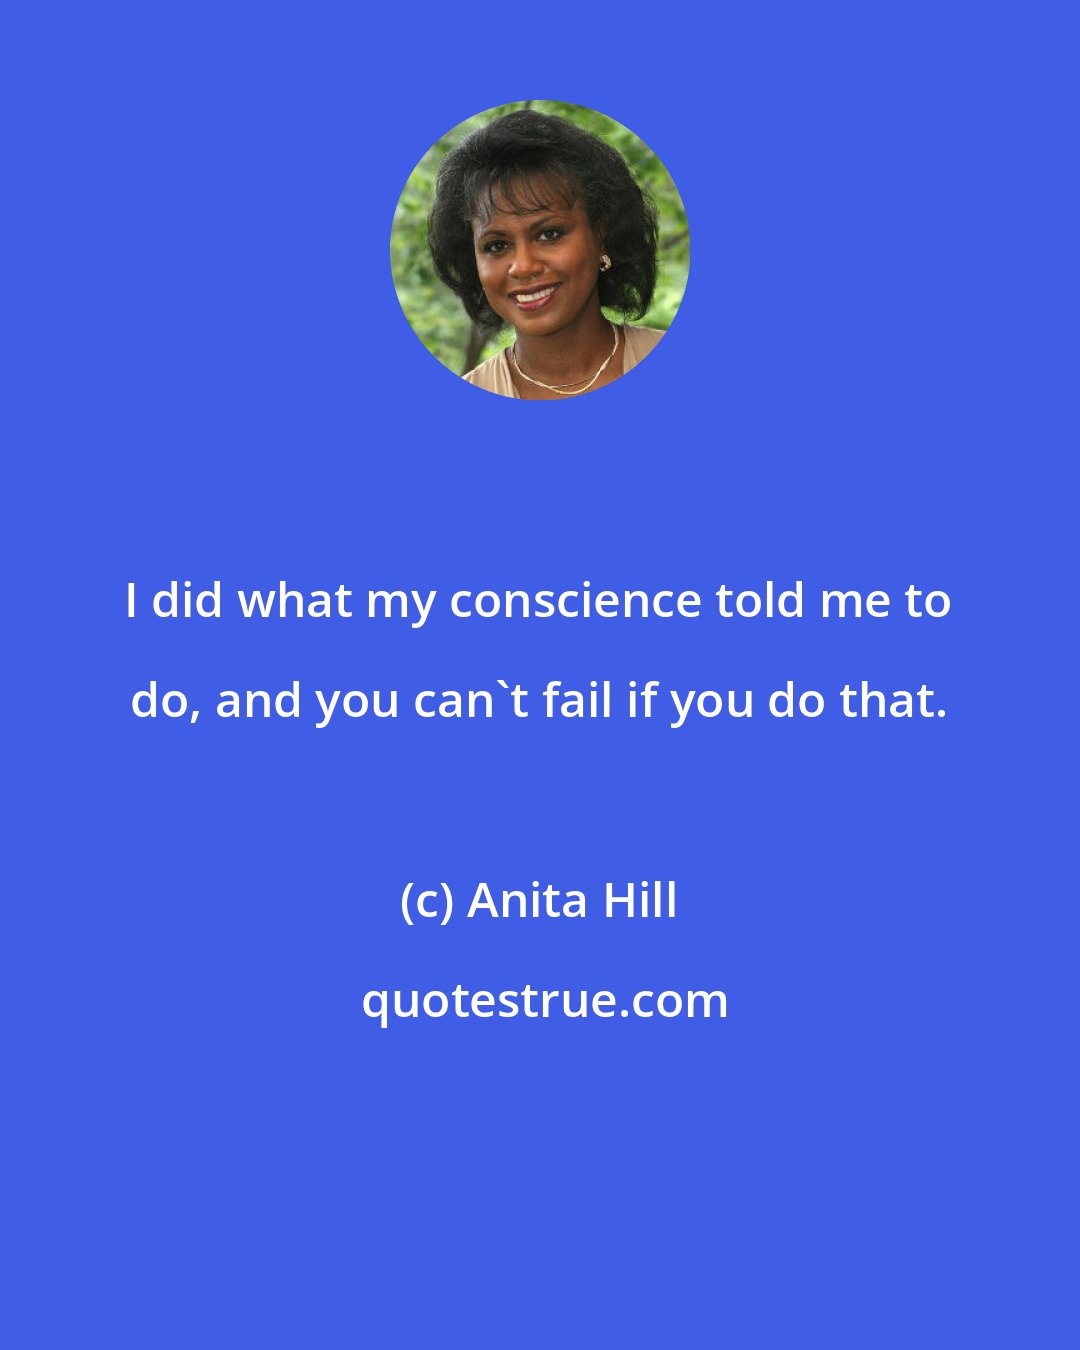 Anita Hill: I did what my conscience told me to do, and you can't fail if you do that.